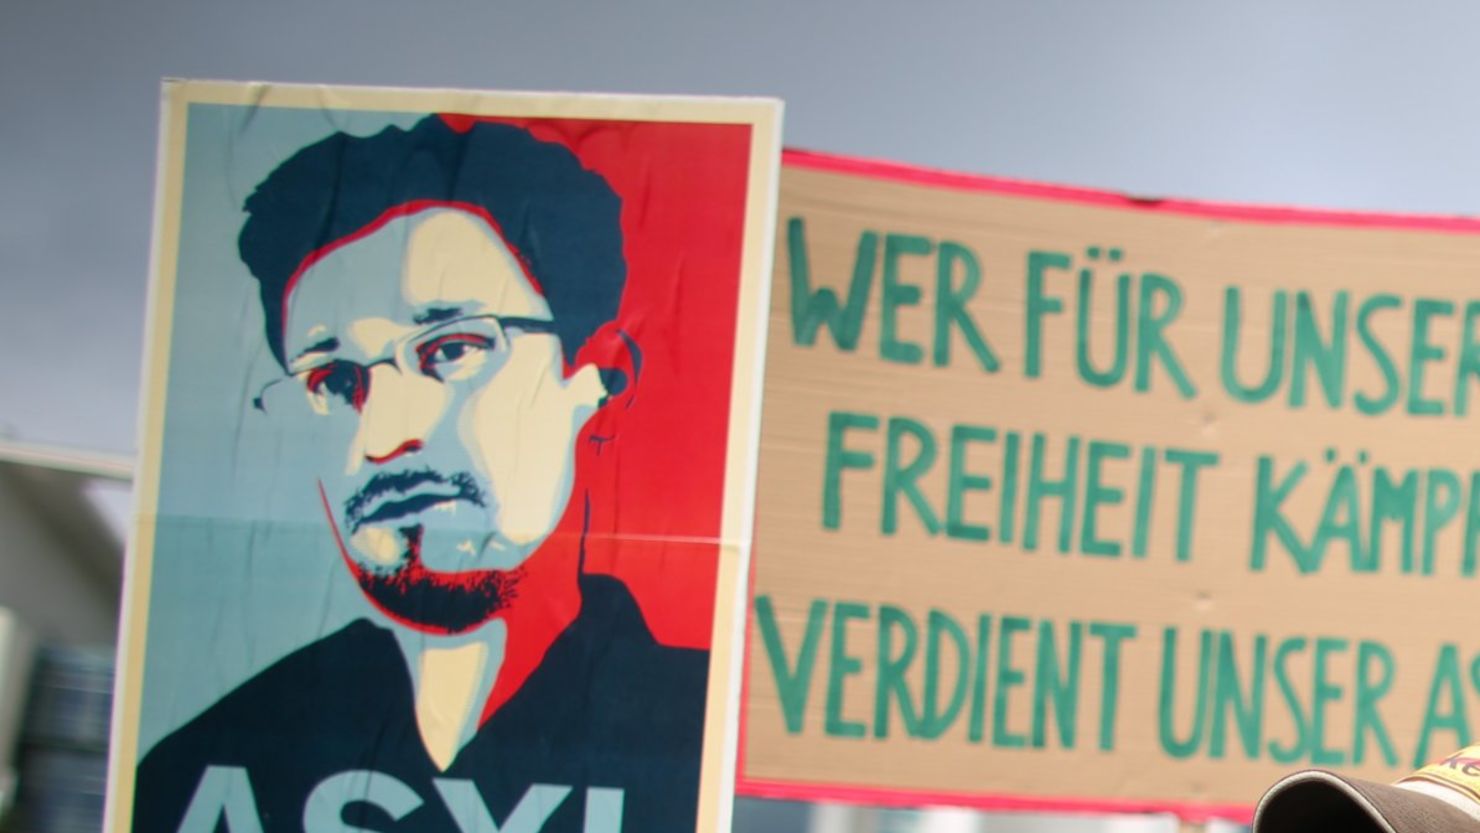 Activists demonstrate on July 4 in front of the German Chancellery in Berlin in support of granting Edward Snowden asylum.
